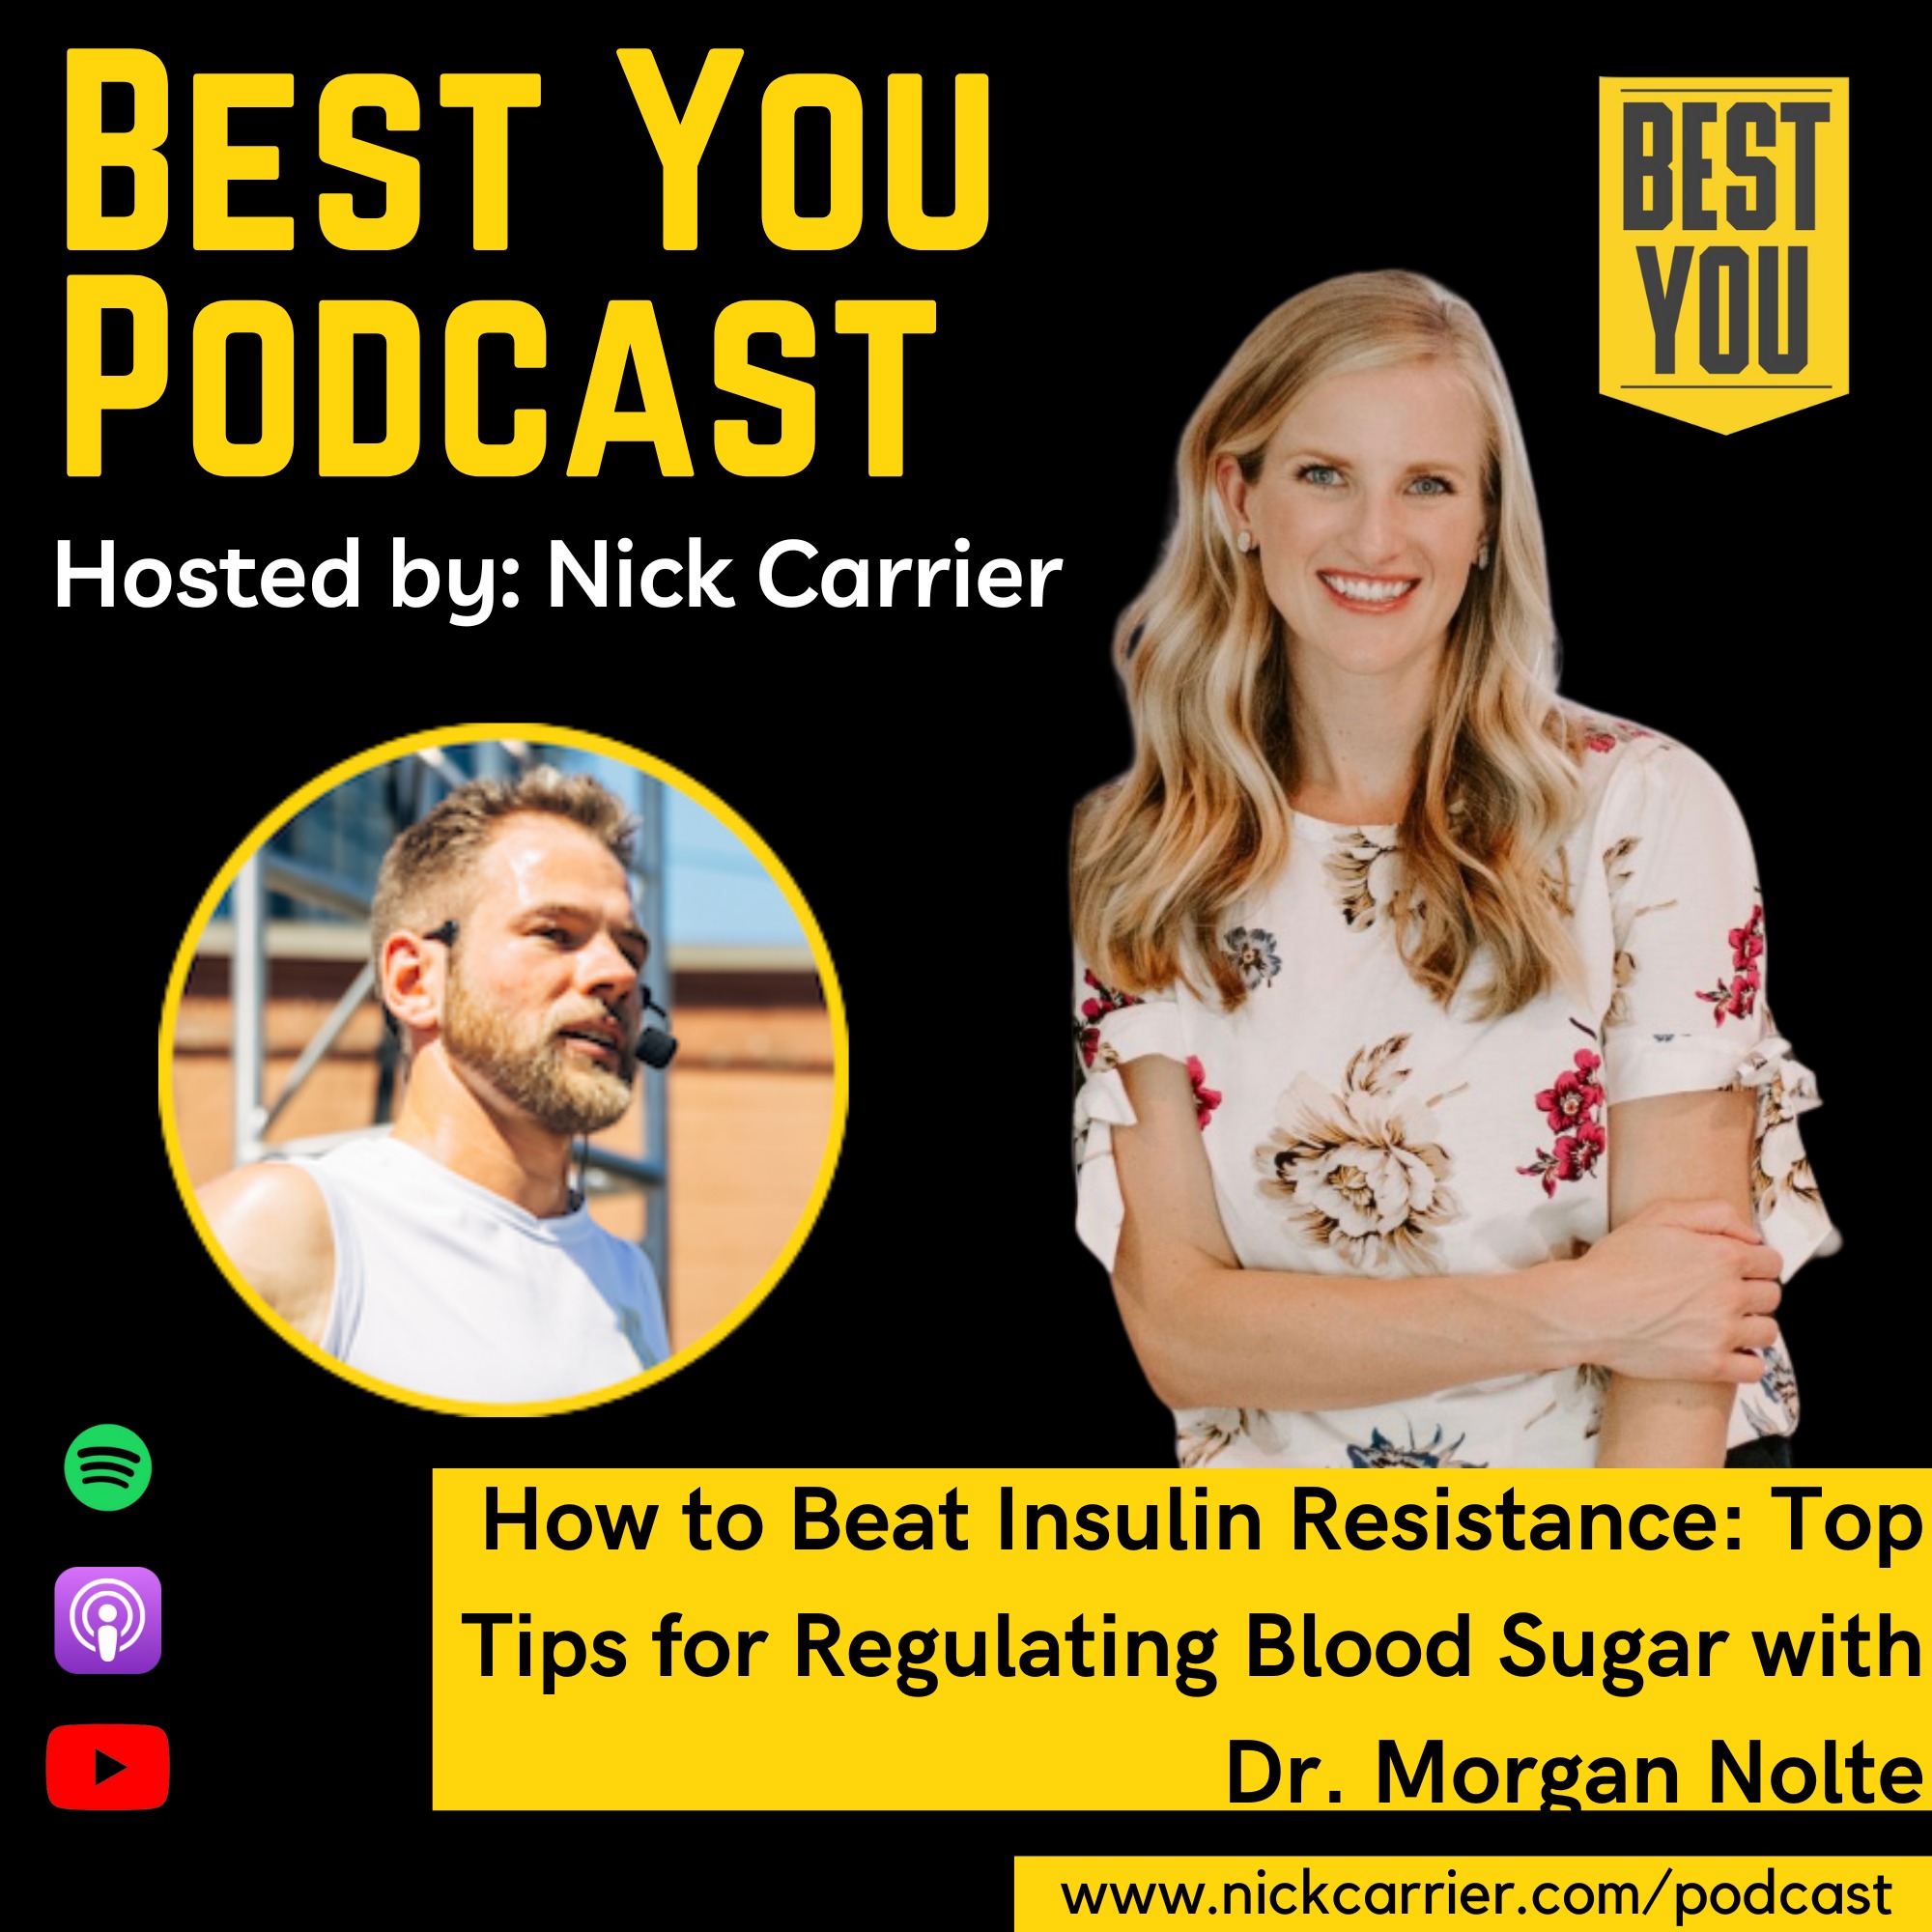 How to Beat Insulin Resistance: Top Tips for Regulating Blood Sugar with Dr. Morgan Nolte